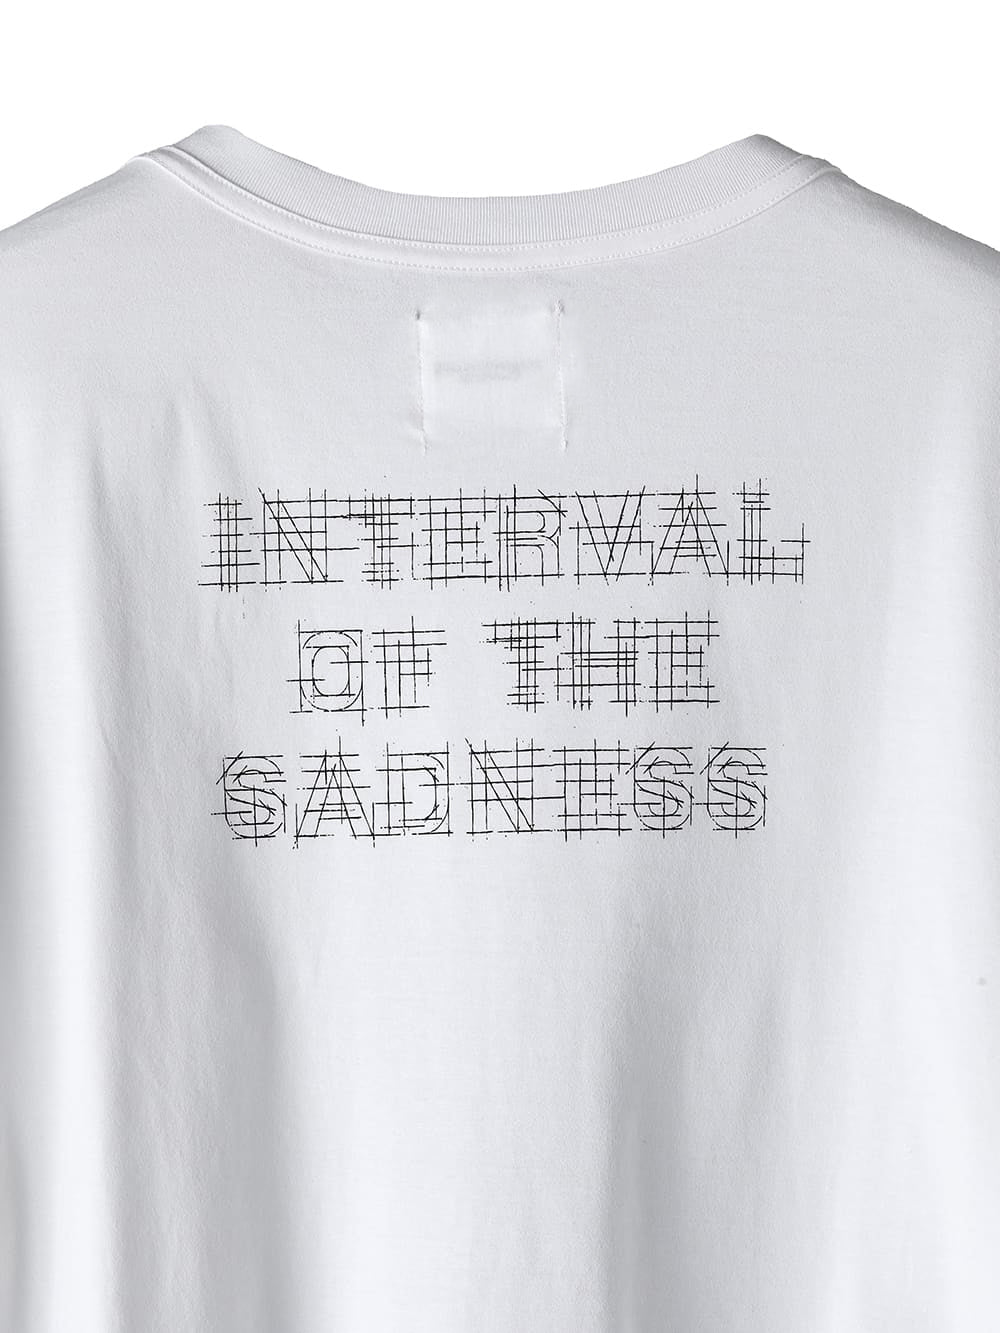 Interval of the sadness. (oversized s/s pocket tee)